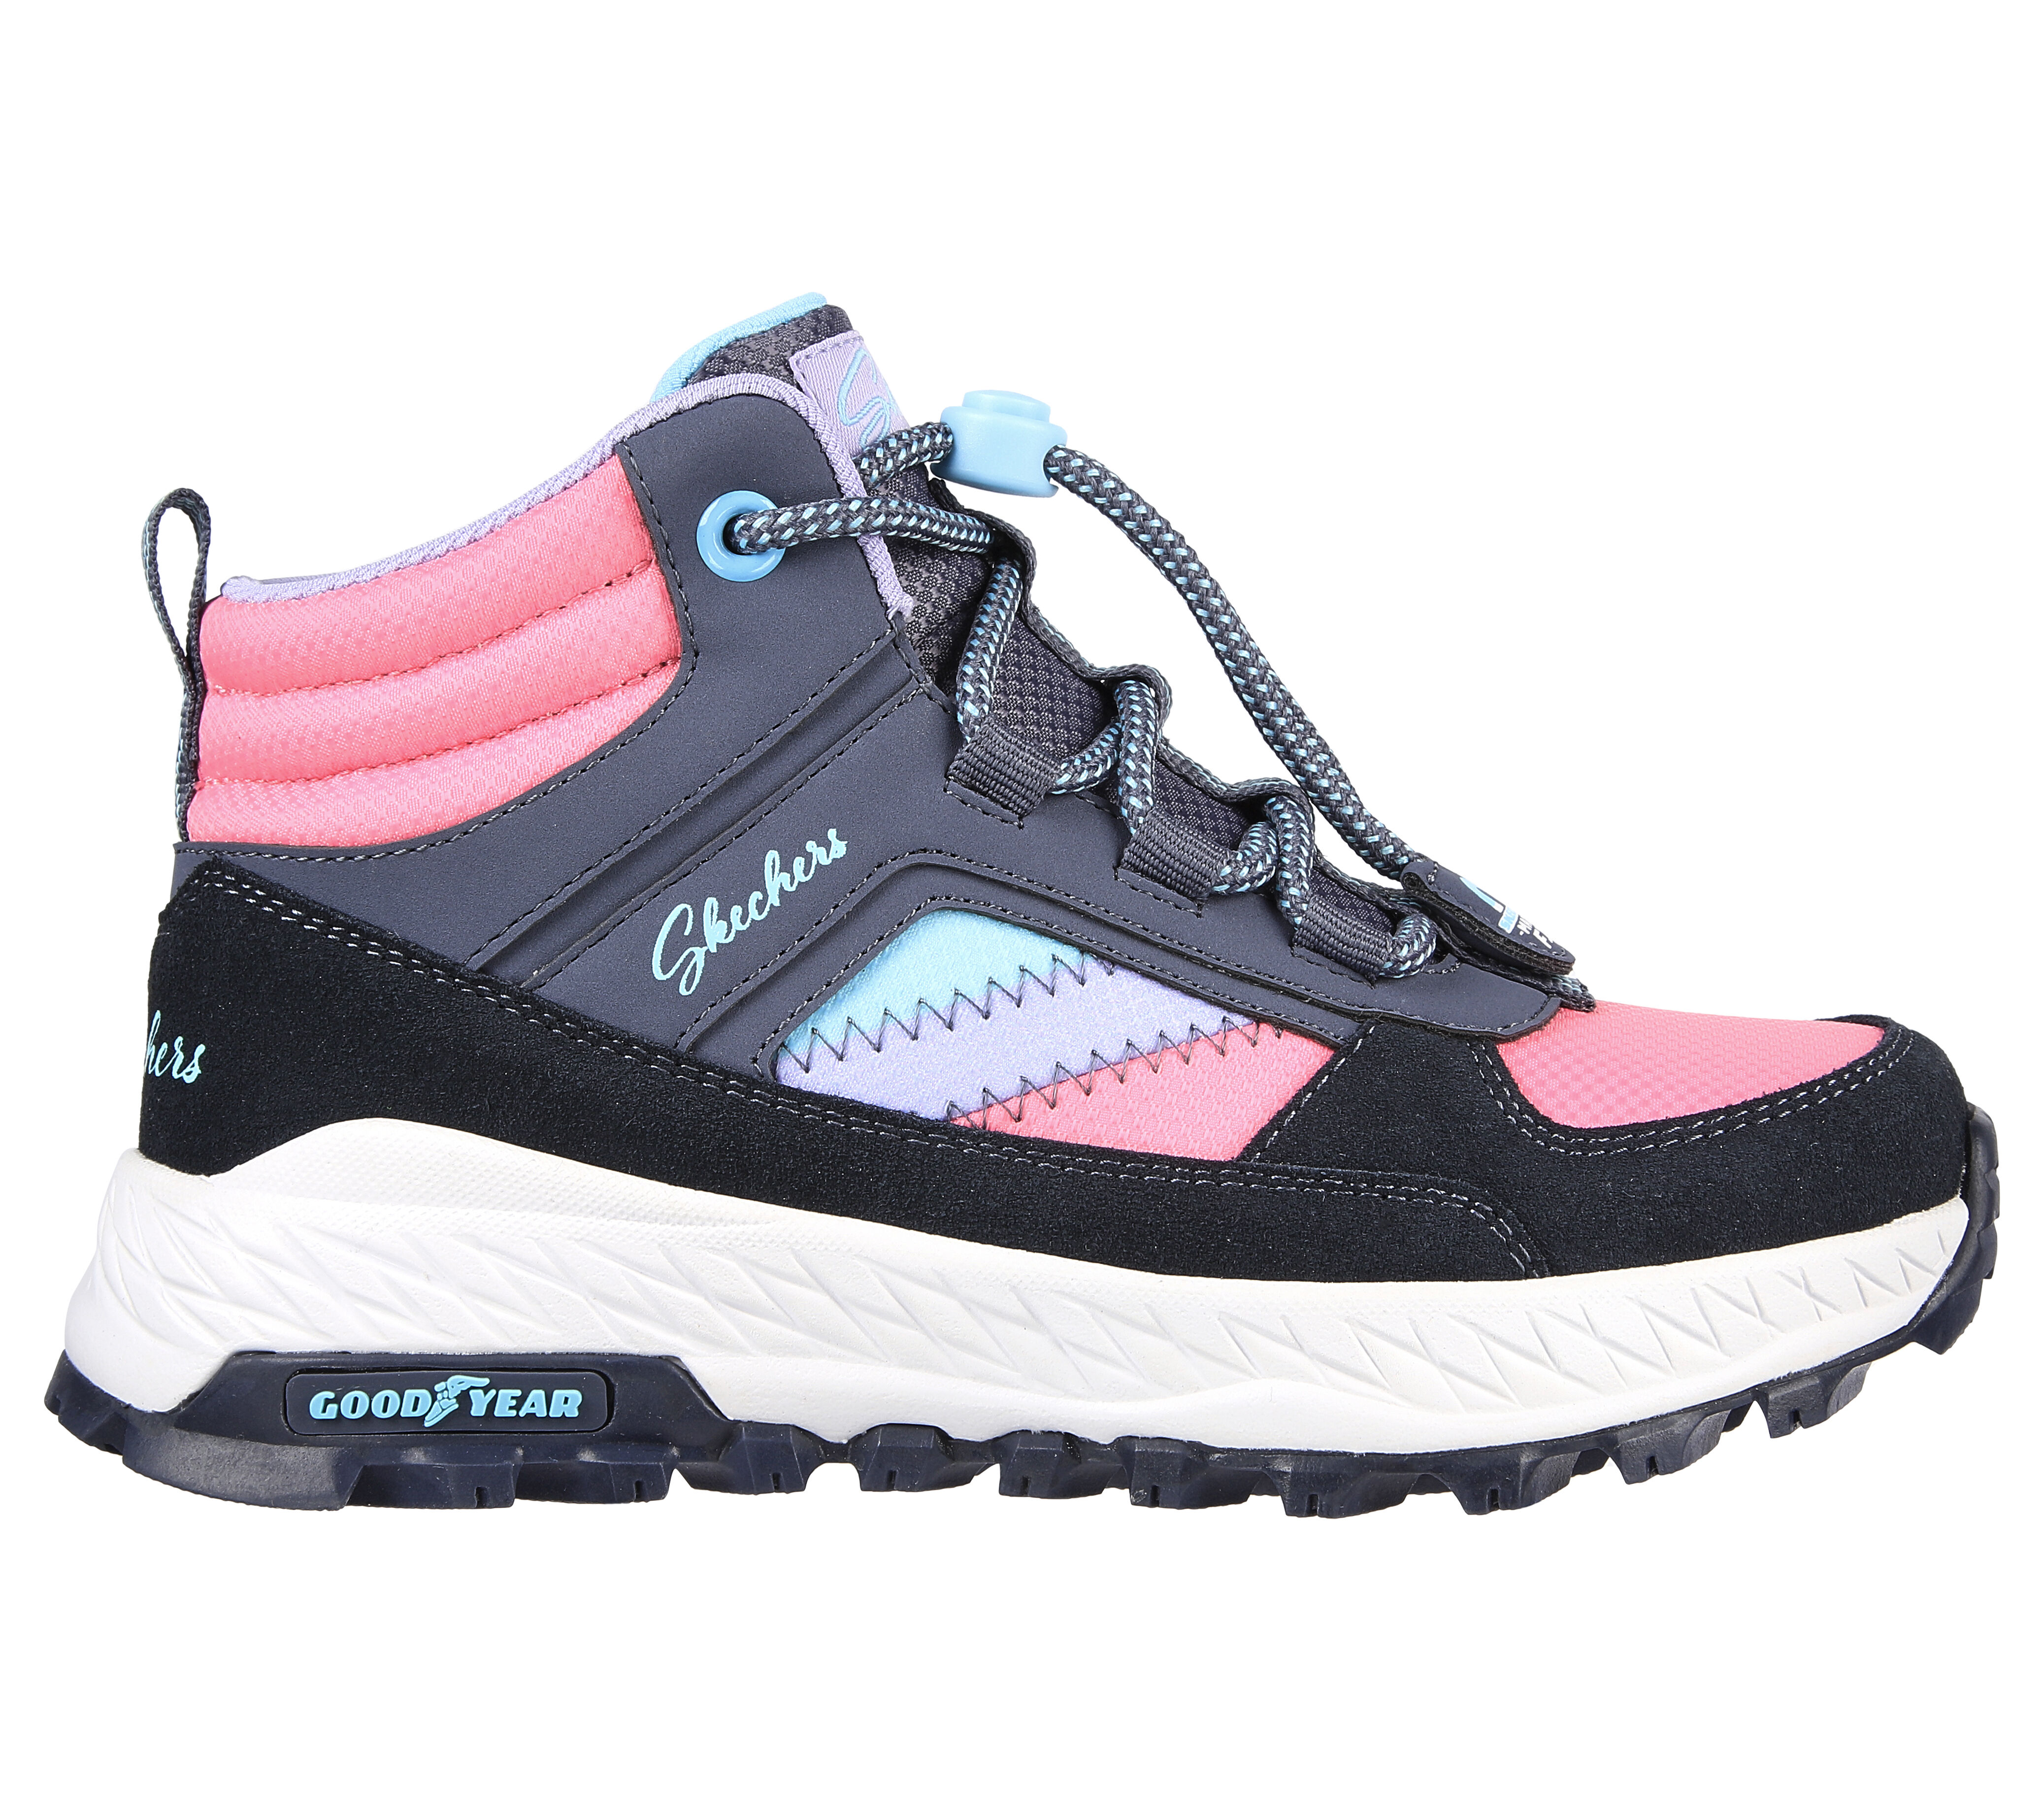 skechers boots for girls